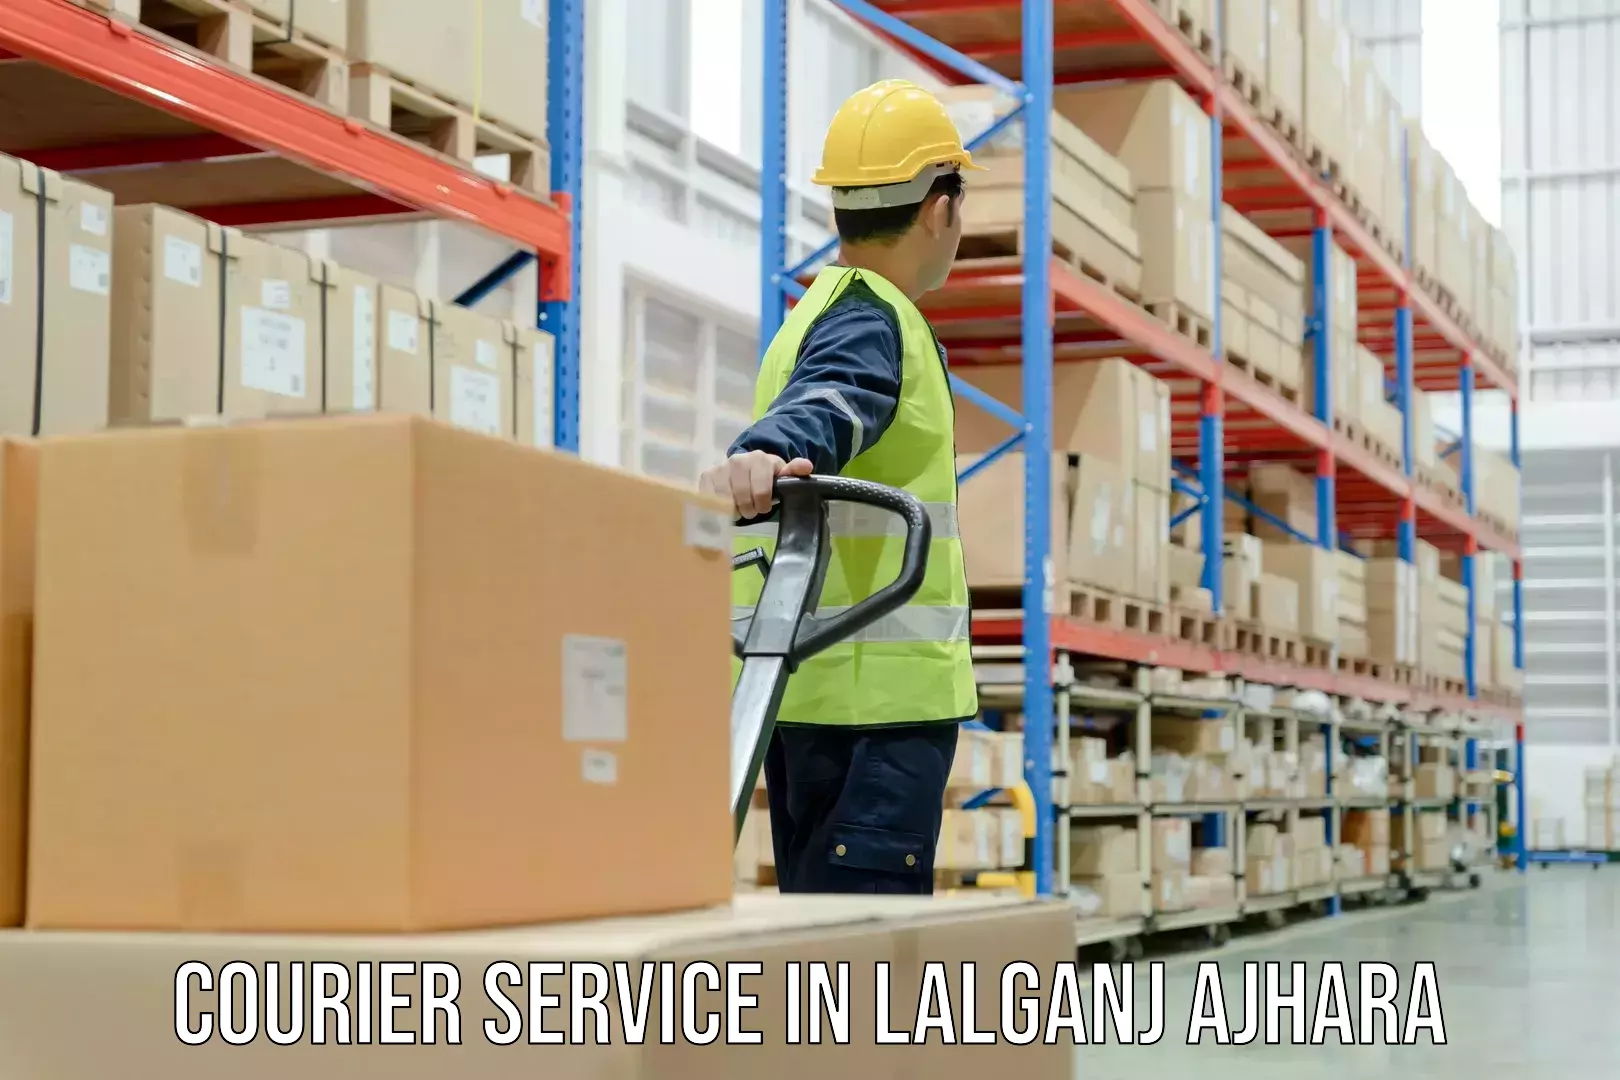 Next-day freight services in Lalganj Ajhara